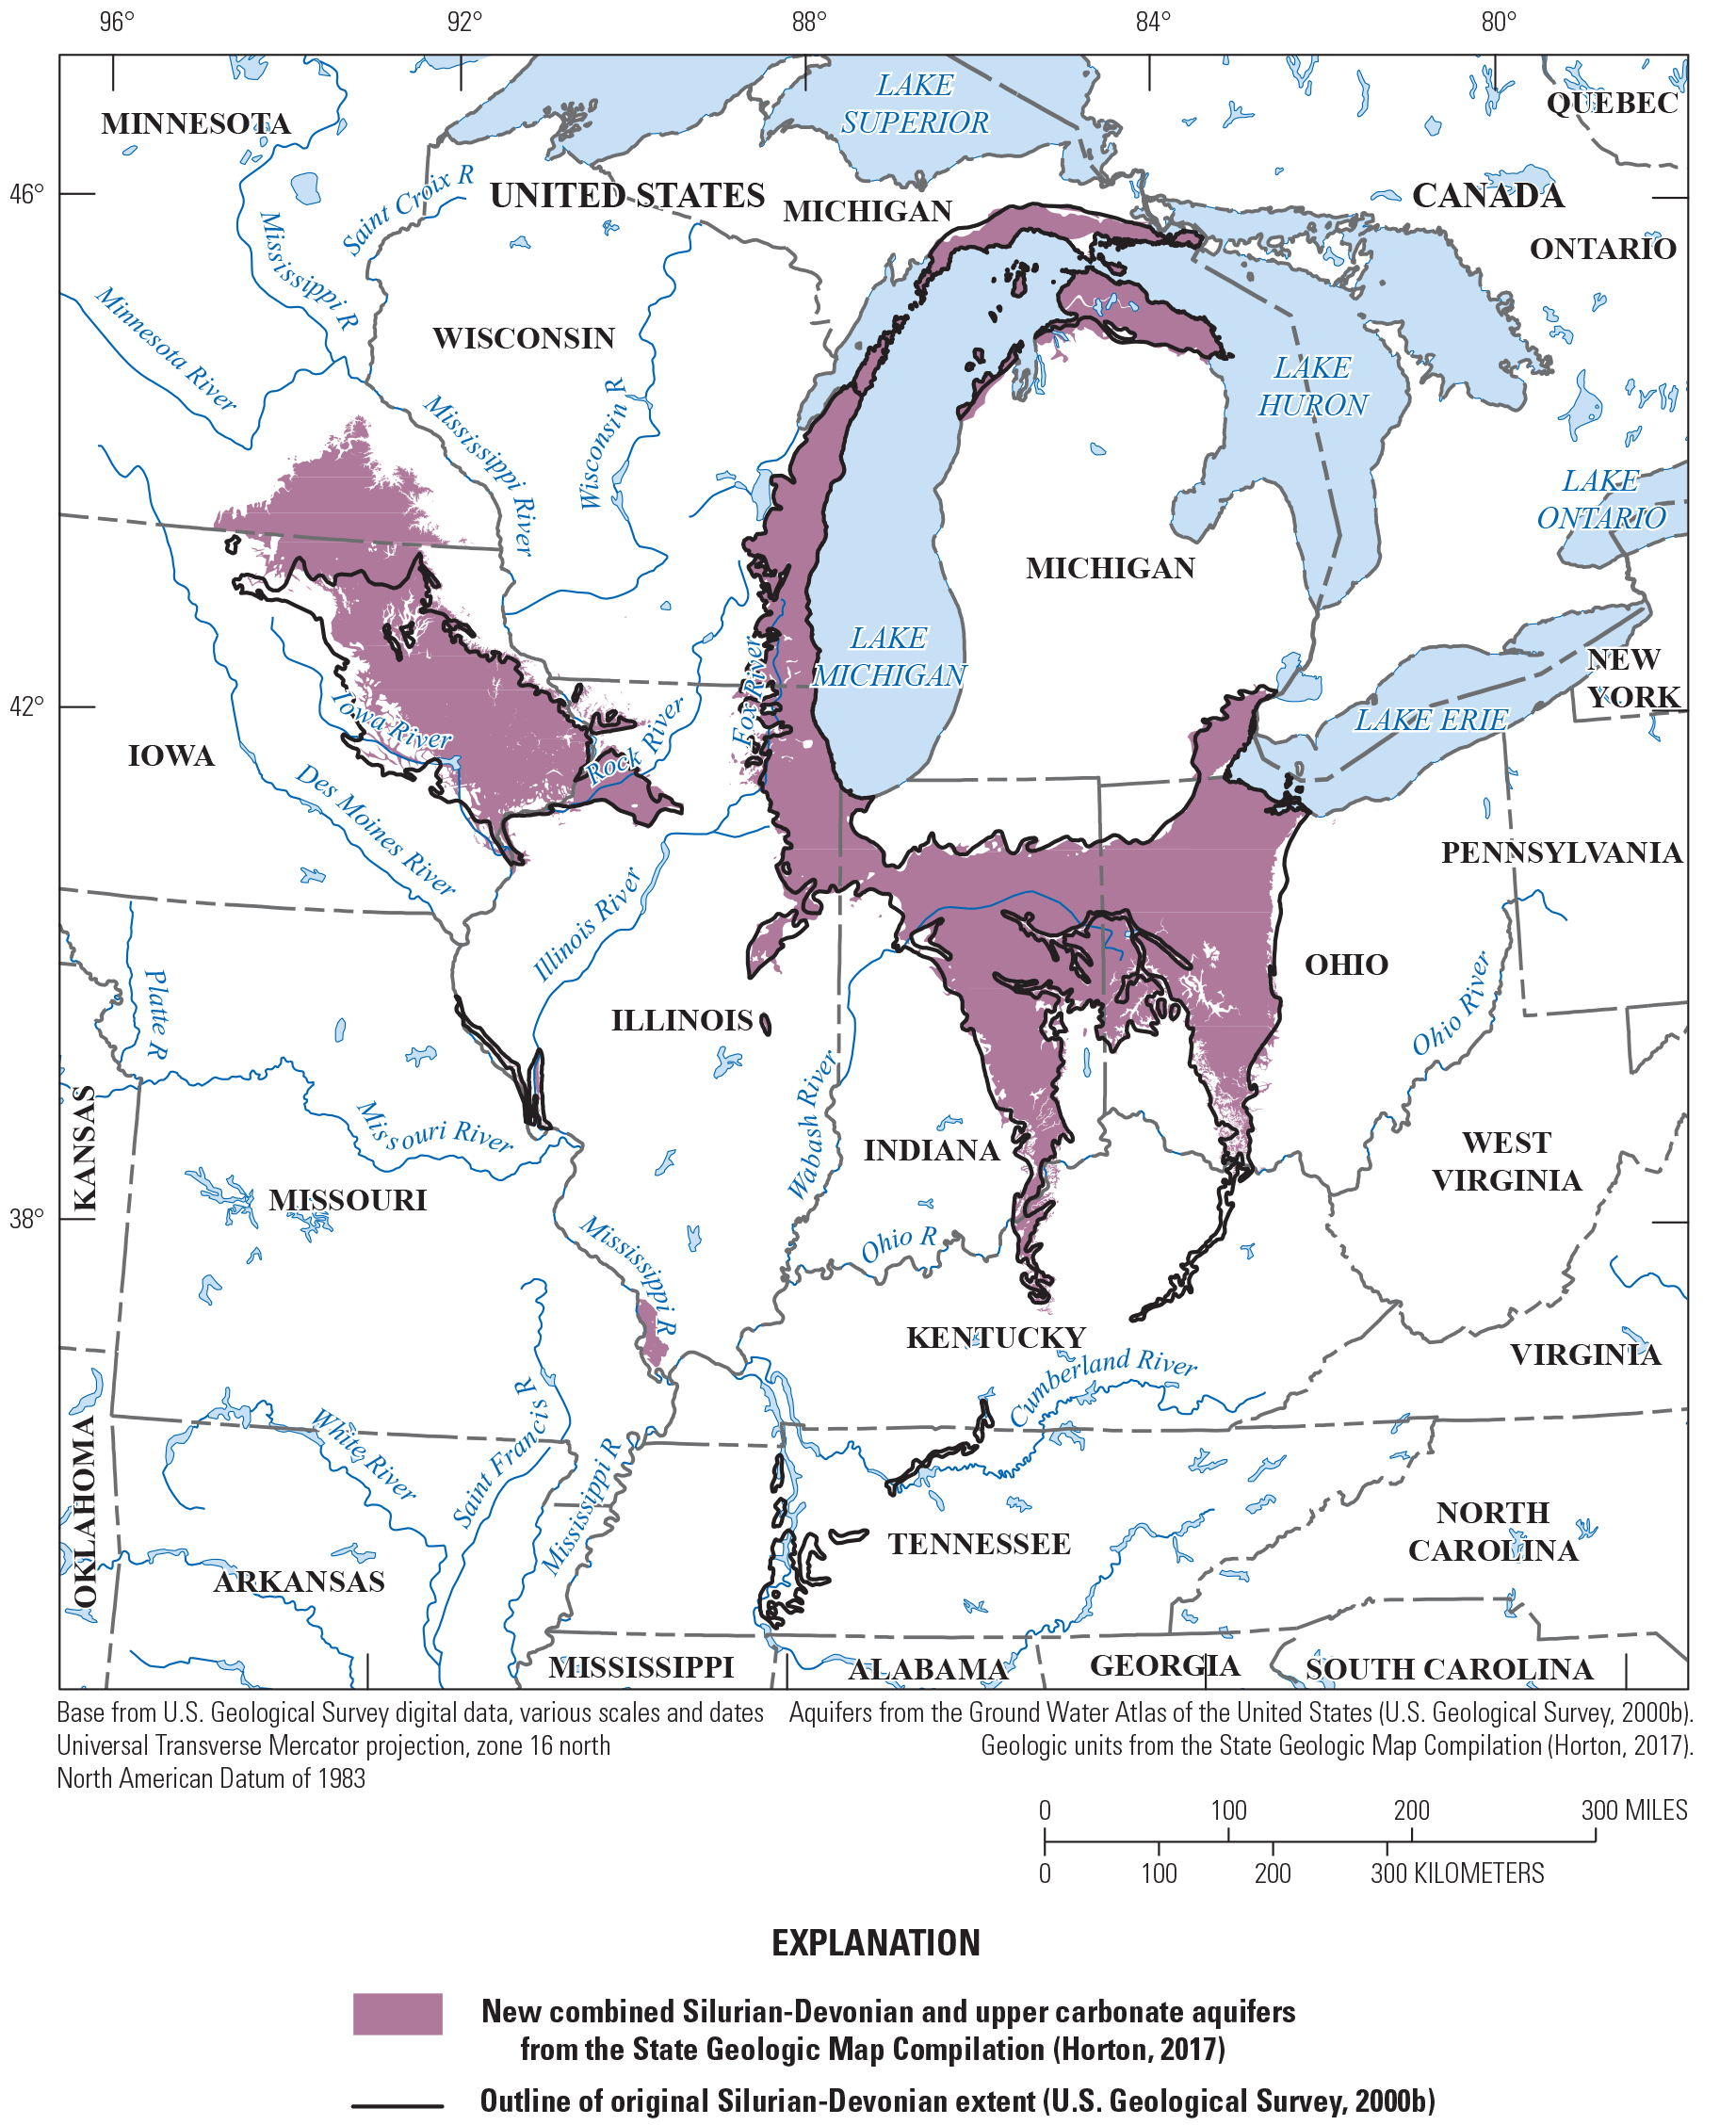 Contrast of the old outline of the Silurian-Devonian aquifer with the revised boundary
                        that includes the upper carbonate aquifer.